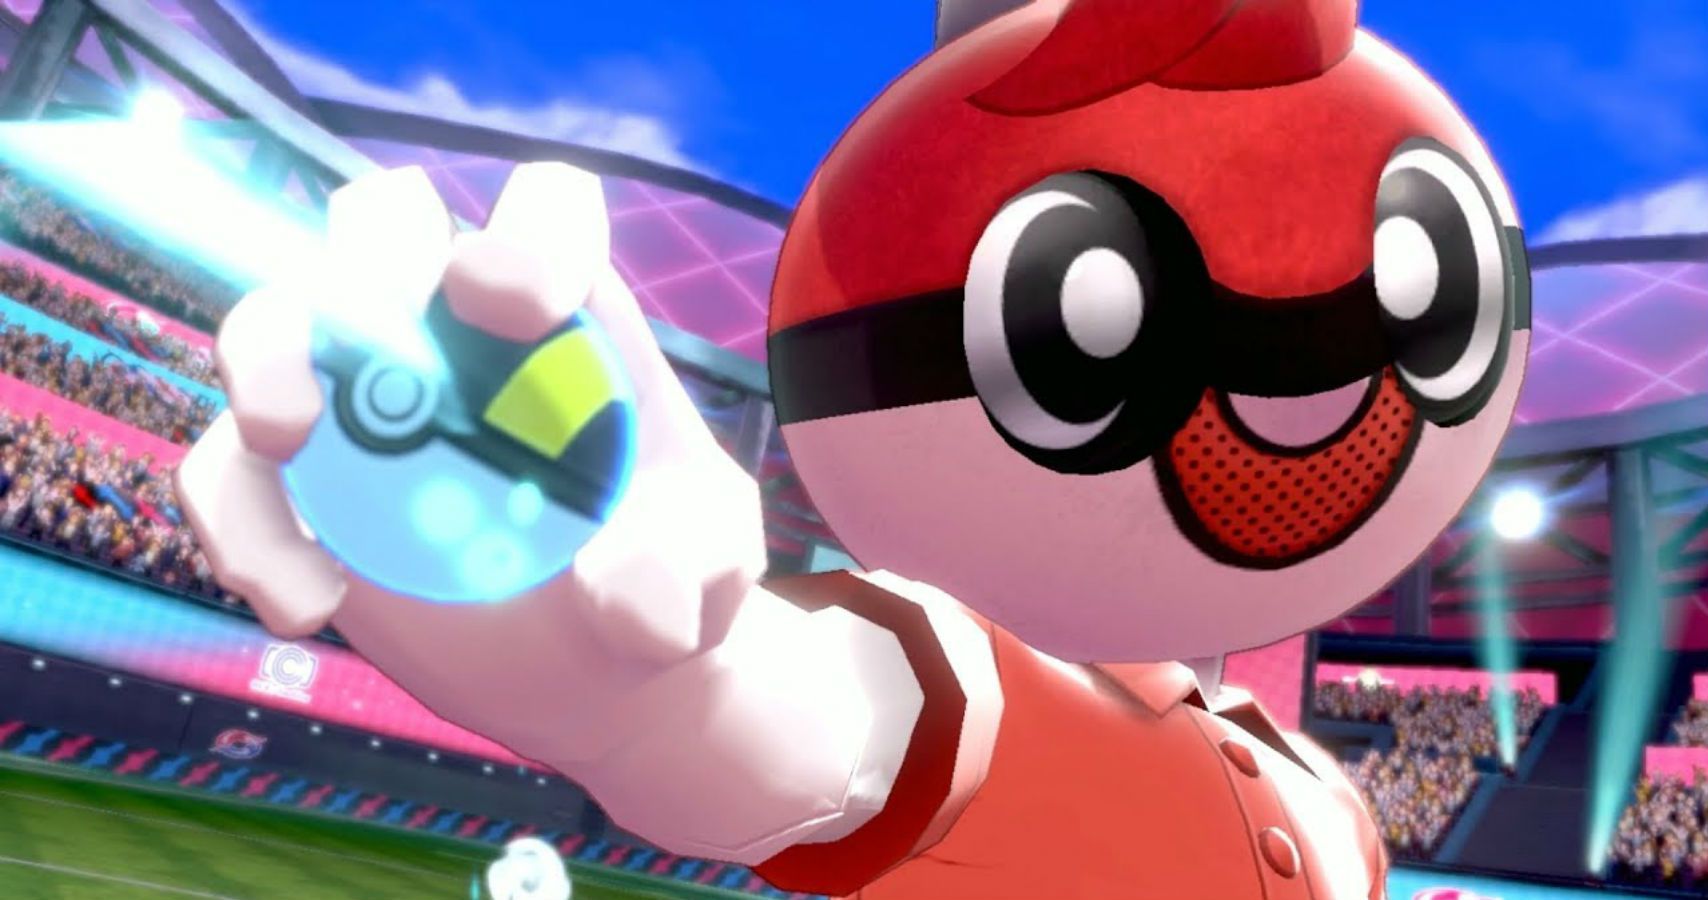 Pokémon Fans Think They’ve Spotted Maskless Ball Guy In Twilight Wings